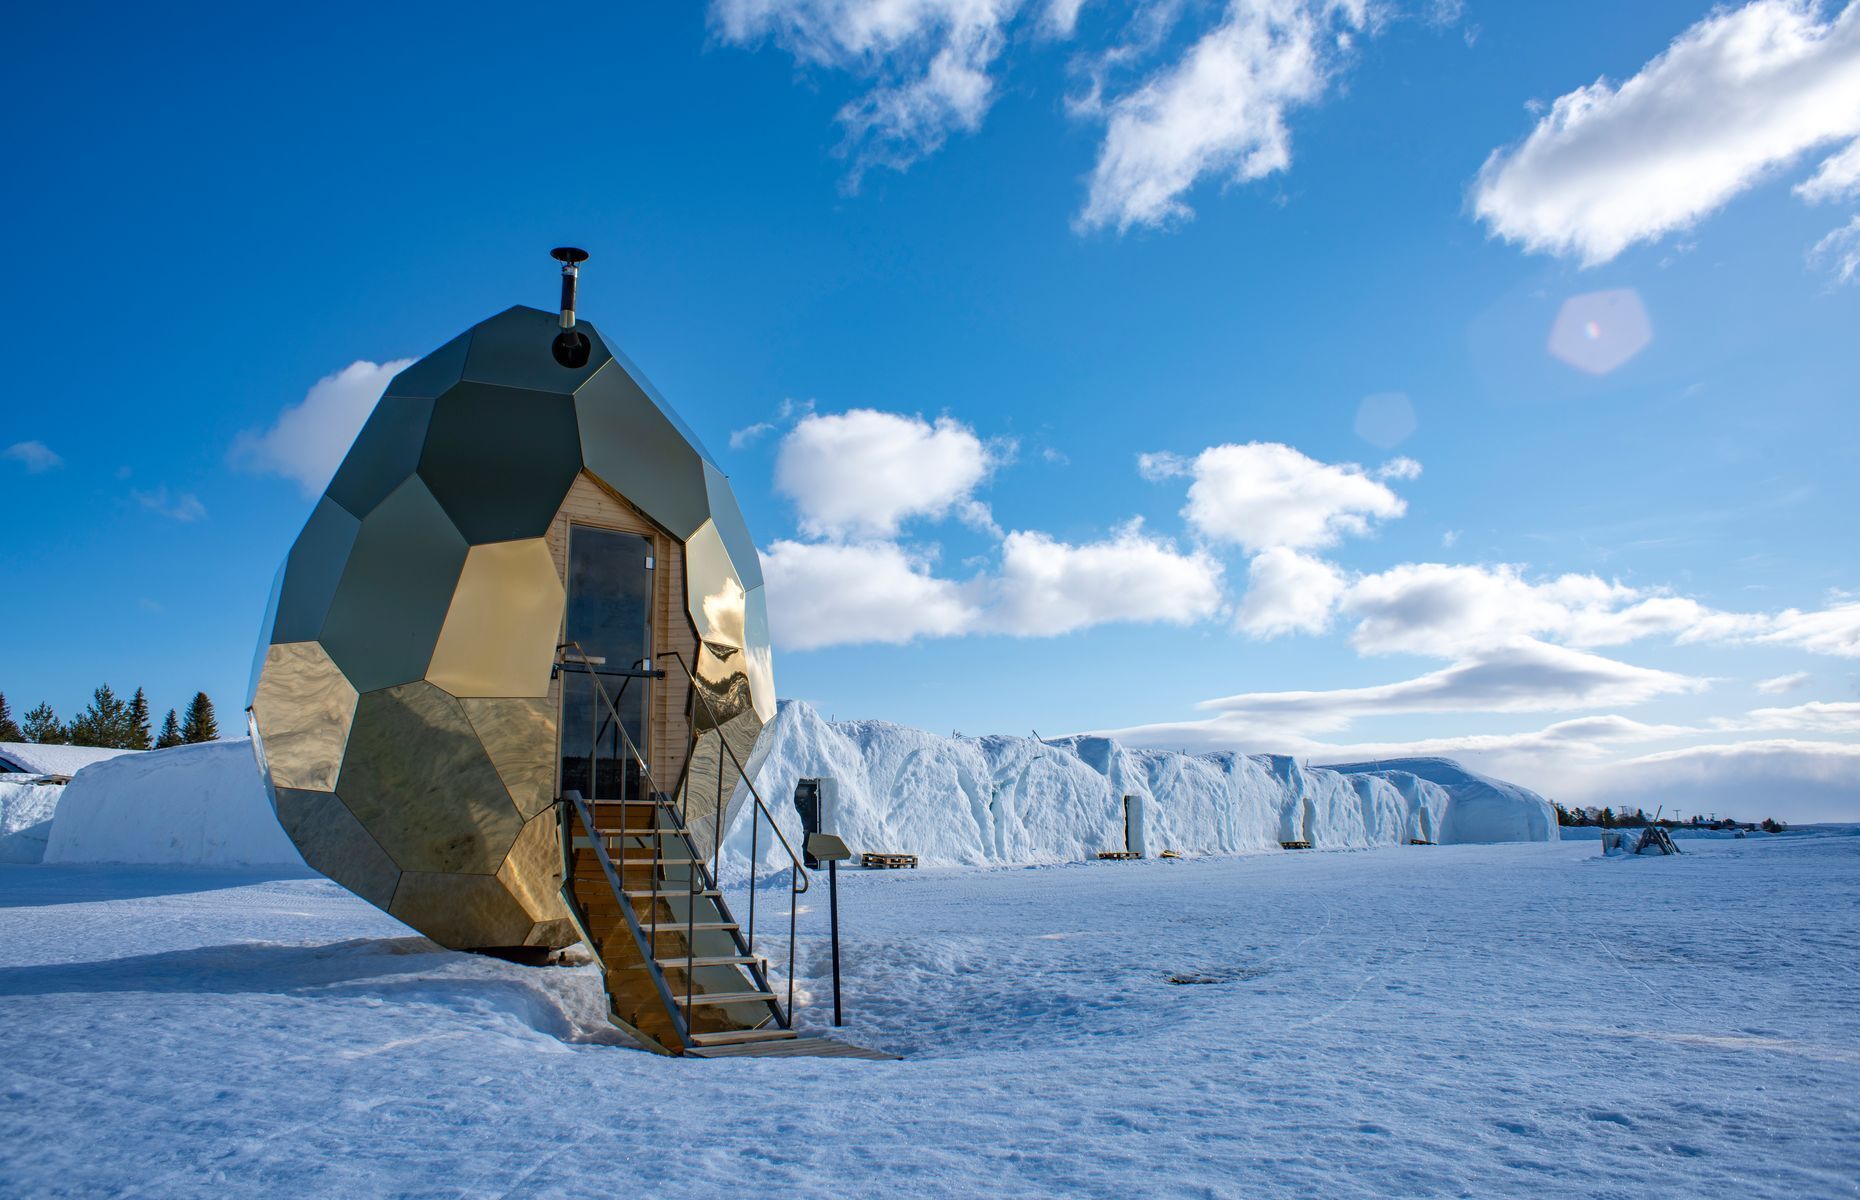 <p>For a most unusual spa experience, visit Kiruna’s <a href="https://www.swedishlapland.com/stories/solar-egg-sauna/" rel="noreferrer noopener">Solar Egg</a>, located in the Arctic region. Measuring over <a href="https://www.designboom.com/design/bigert-bergstrom-solar-egg-sauna-kiruna-sweden-05-09-2017/" rel="noreferrer noopener">five metres high and four metres wide</a>, this golden egg-shaped sauna with a pine interior can accommodate up to <a href="https://www.thisiscolossal.com/2017/05/a-mirrored-golden-egg-sauna-is-hatched-in-sweden/" rel="noreferrer noopener">eight guests at a time</a>. Complete the thermal cycle with a roll in the snow to lower your body temperature.</p>